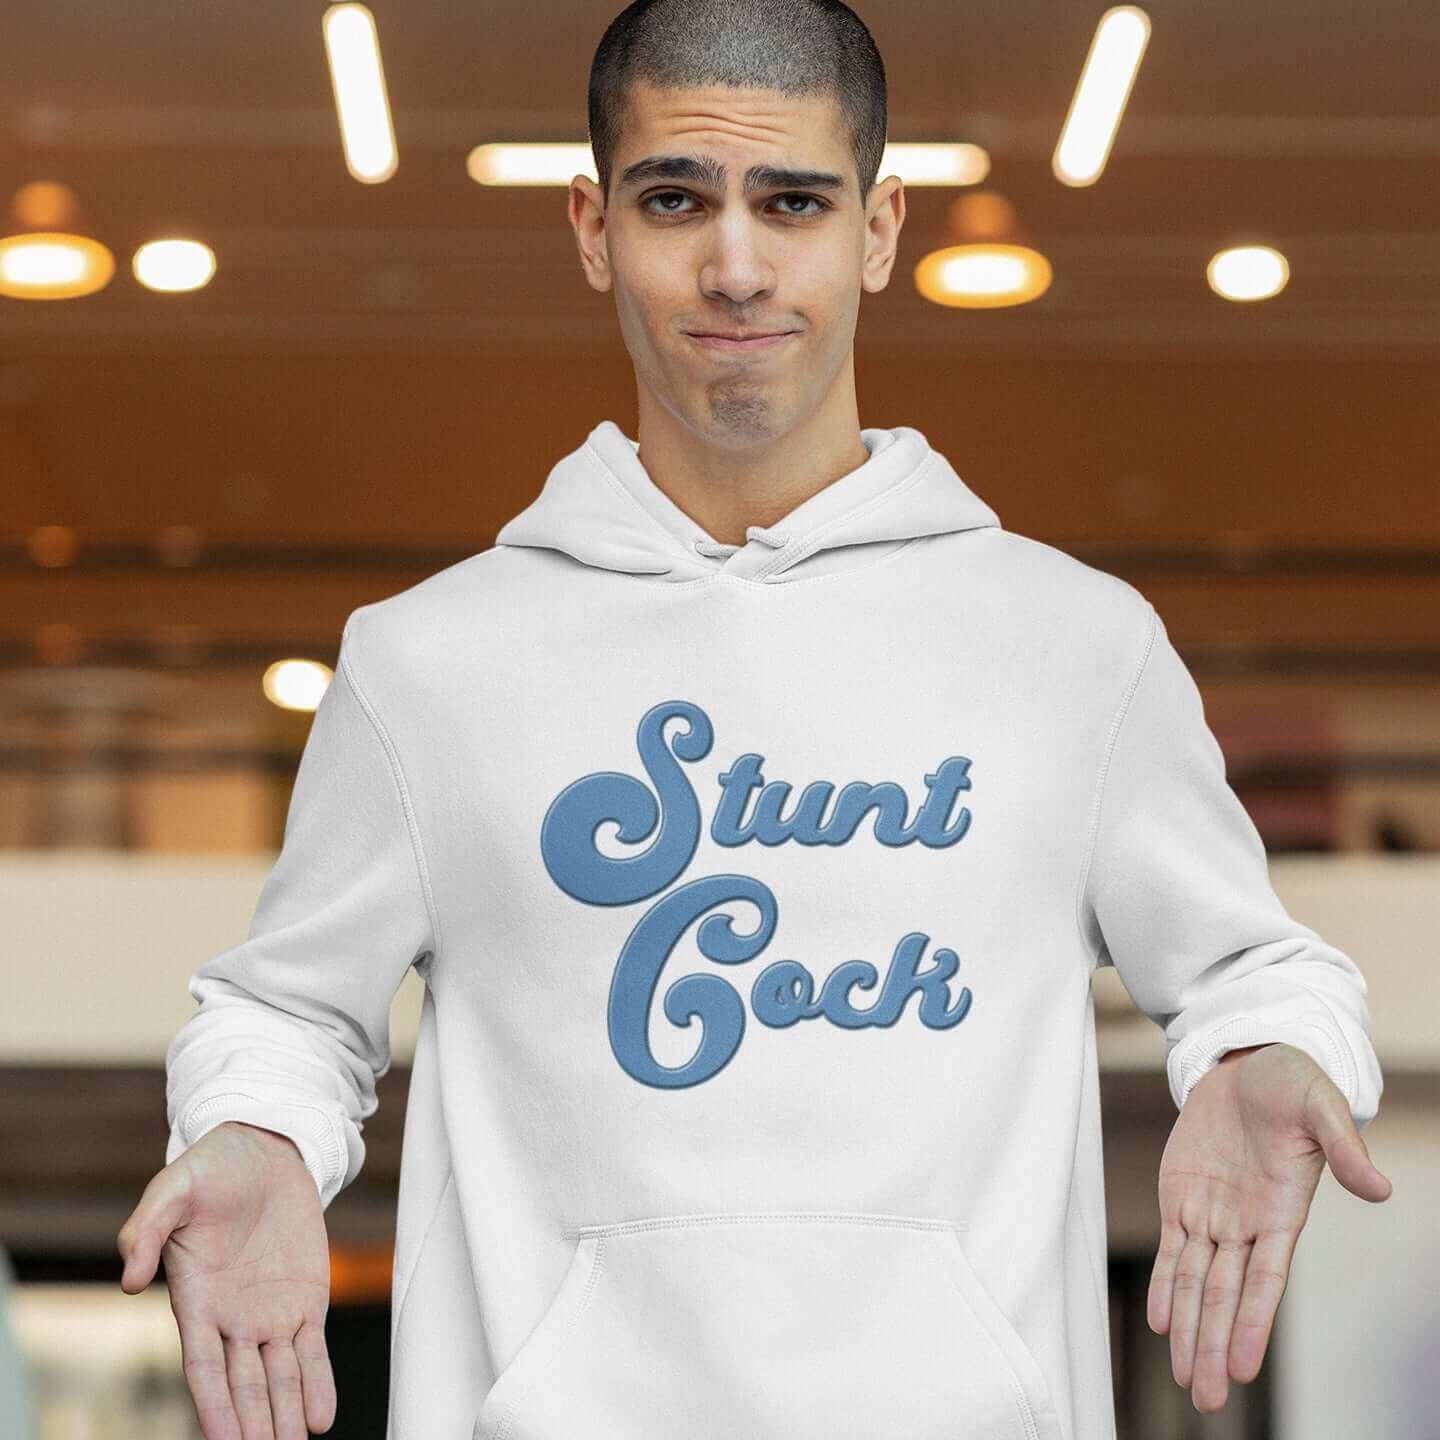 Man making funny face gesturing to the front of his hoodie. He is wearing a white hooded sweatshirt with the words Stunt Cock printed on the front in blue.